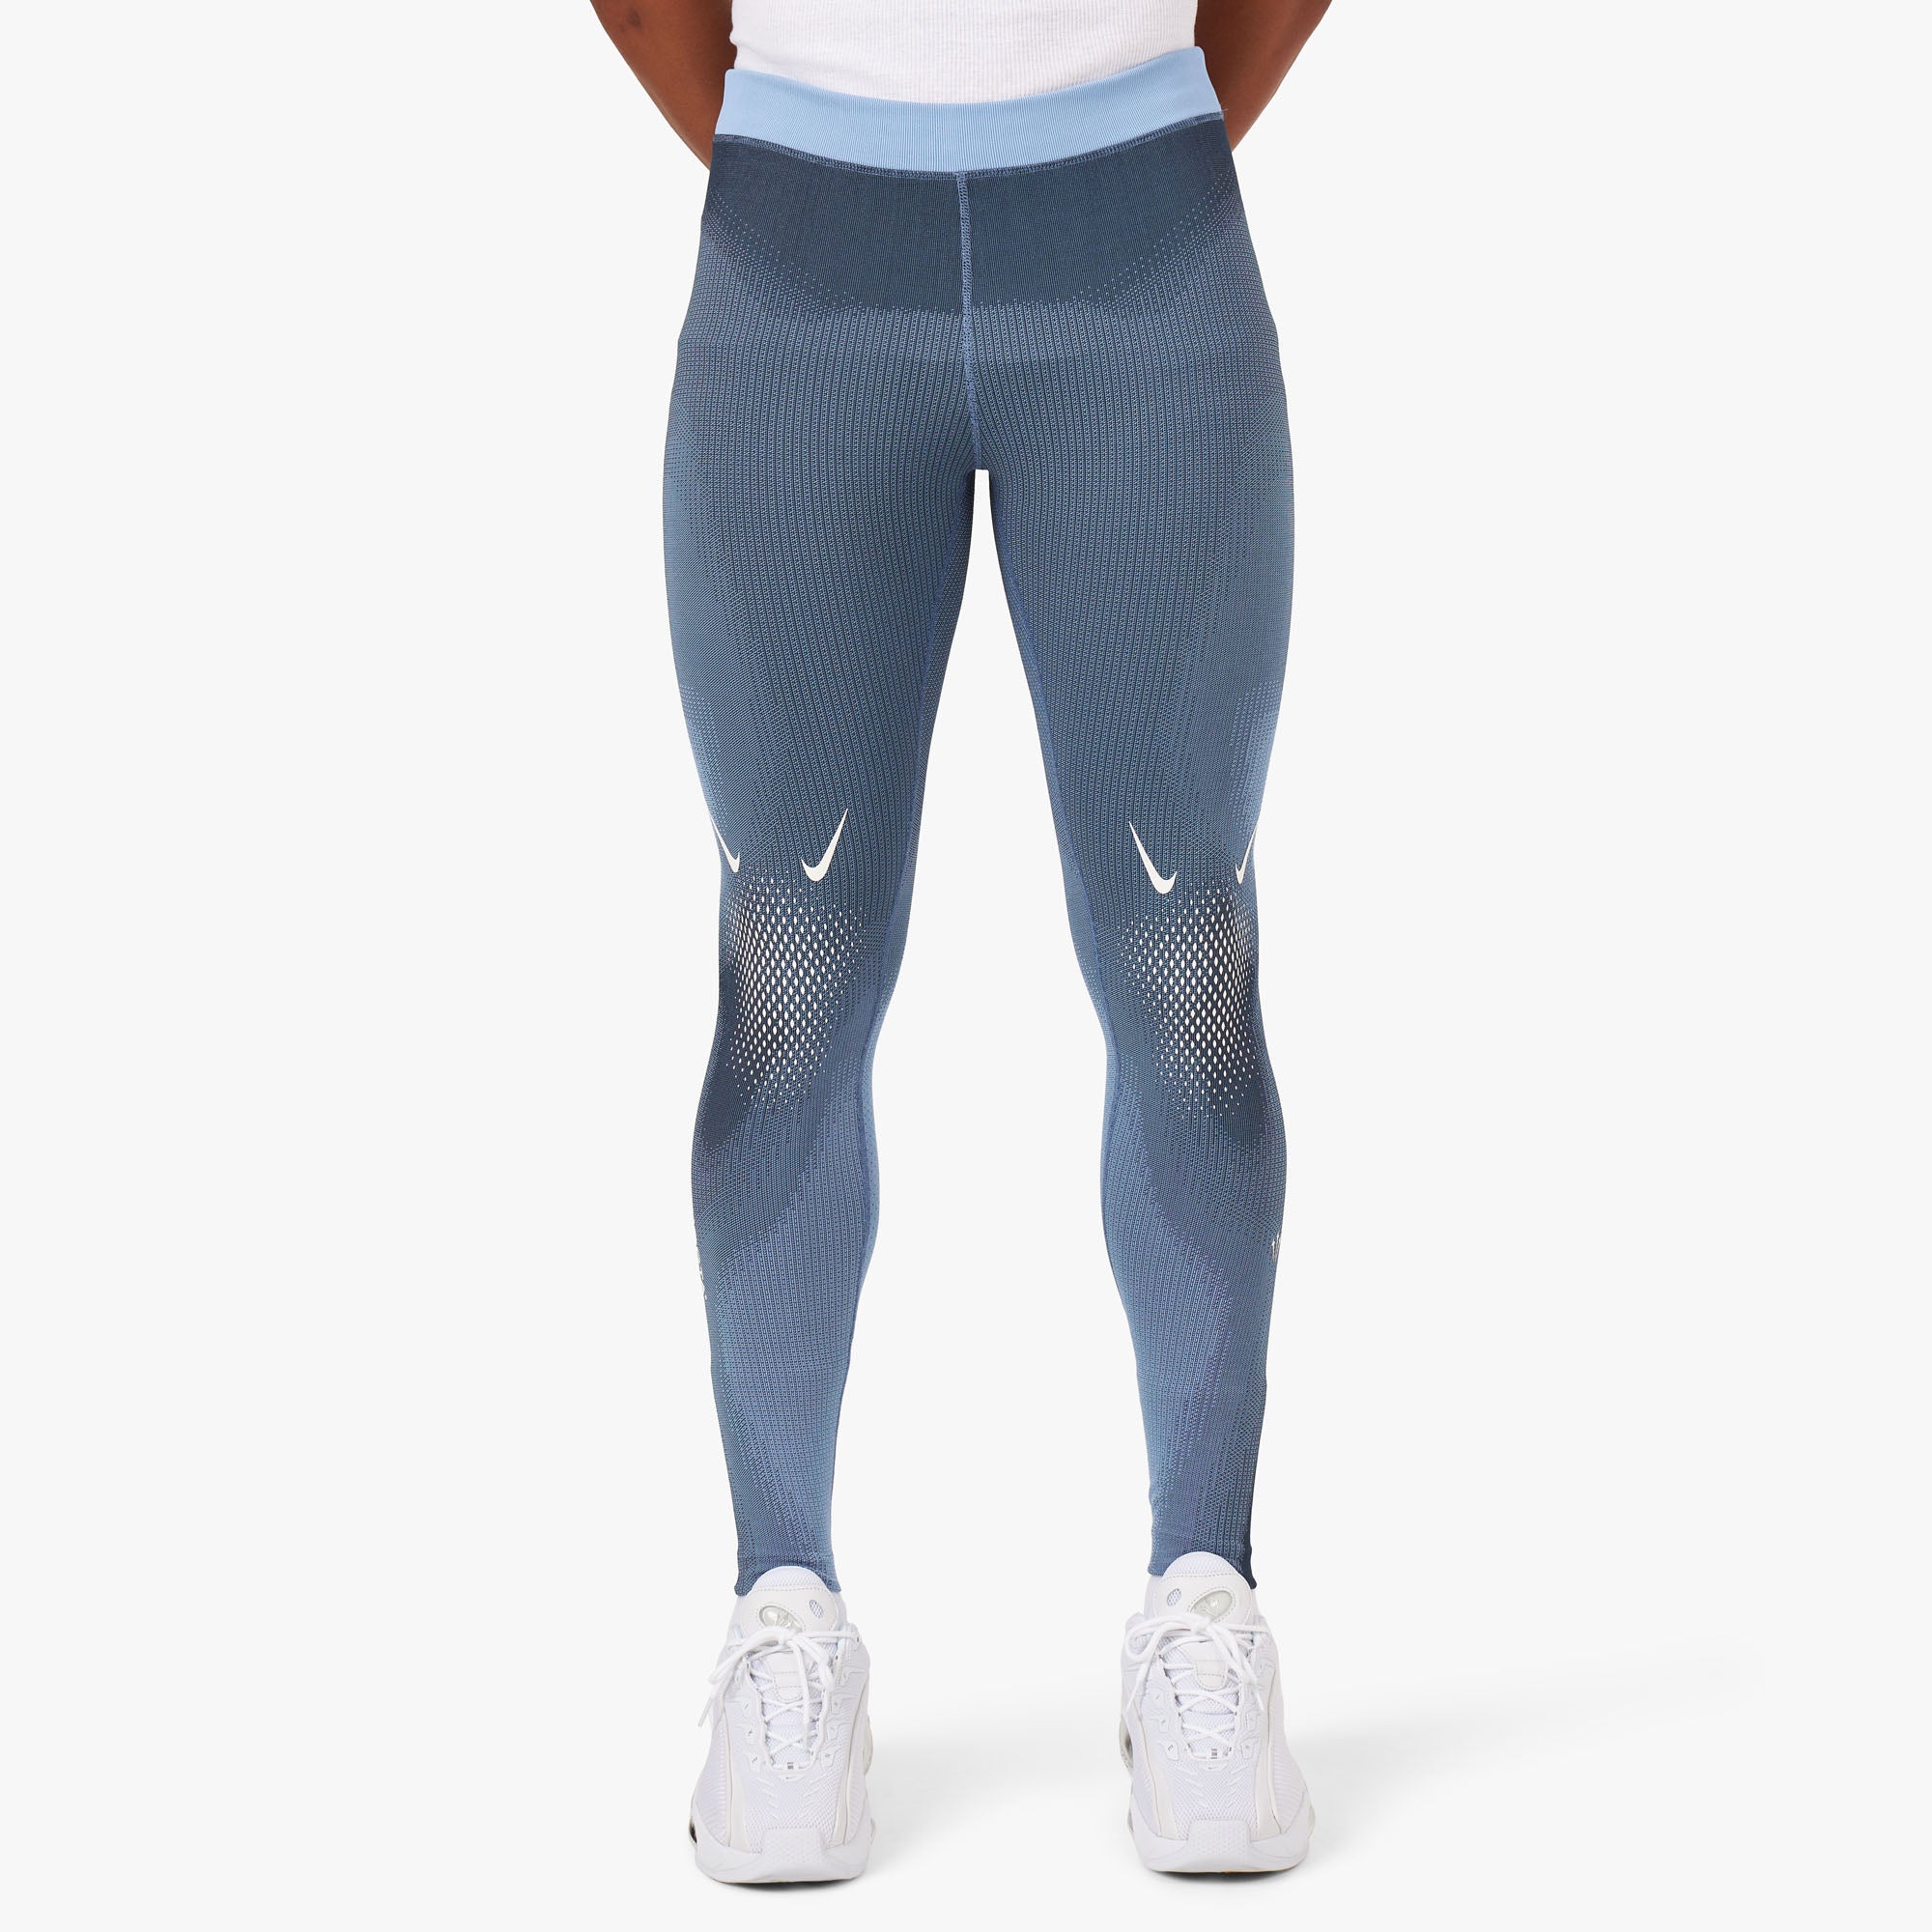 Benefits of Running in Tights. Nike CA